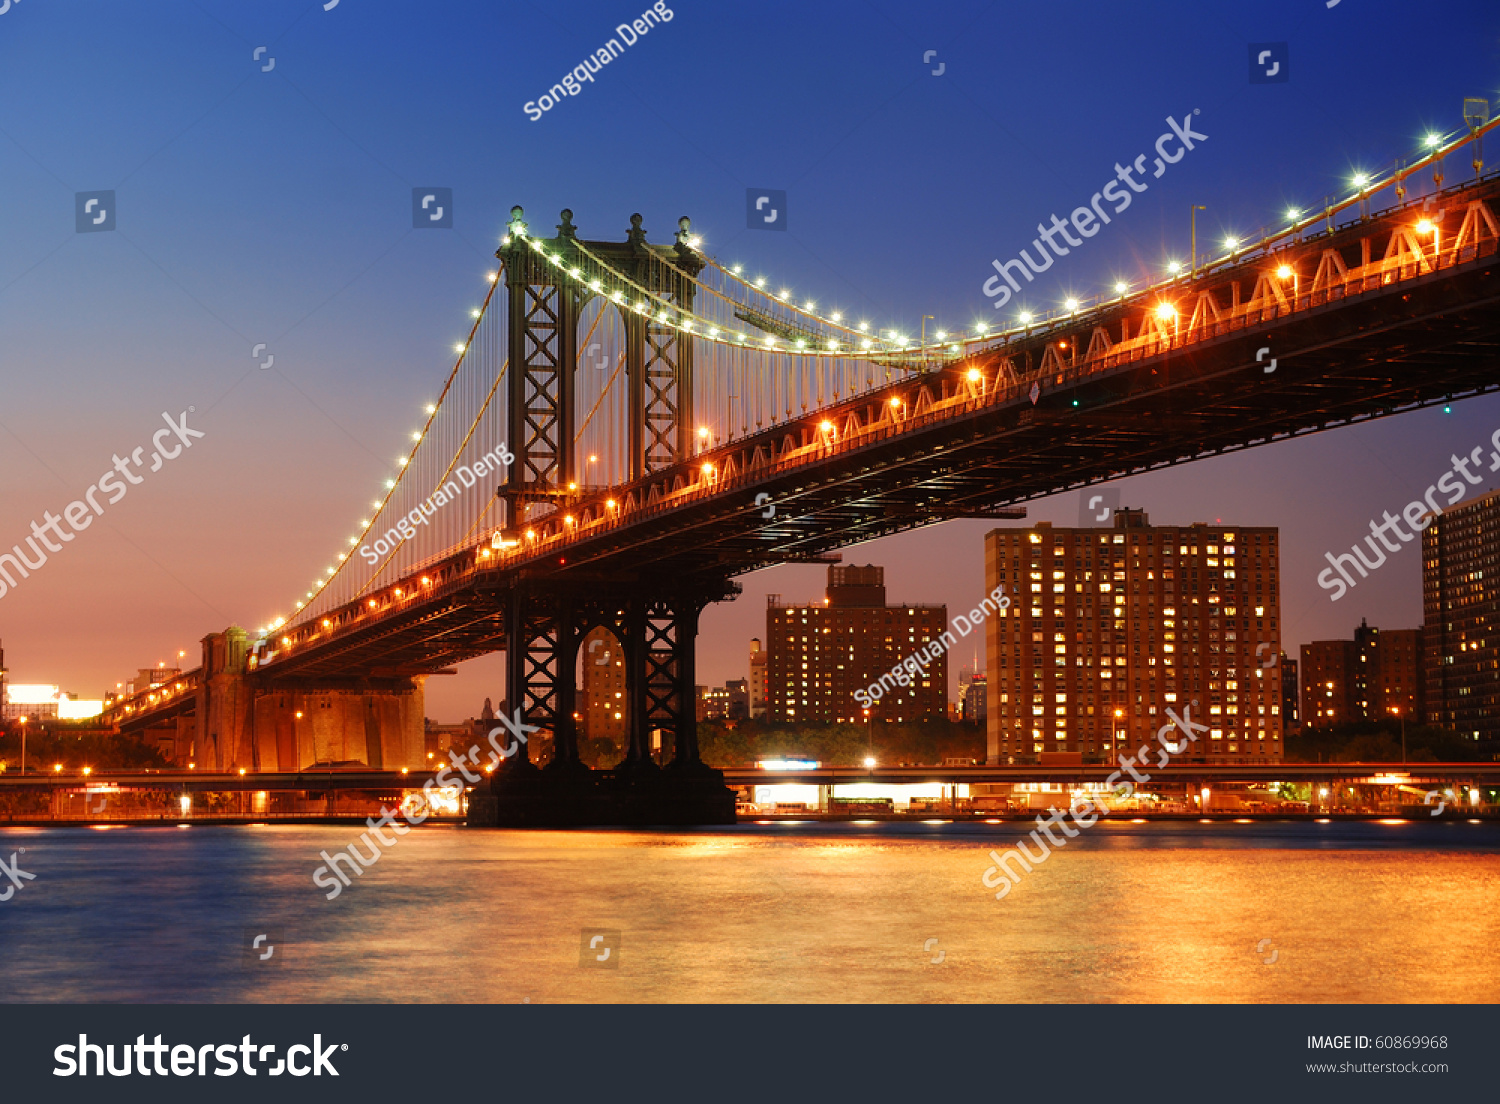 New York City Manhattan Bridge over Hudson River with skyline after sunset night view illuminated with lights viewed from Brooklyn. #60869968